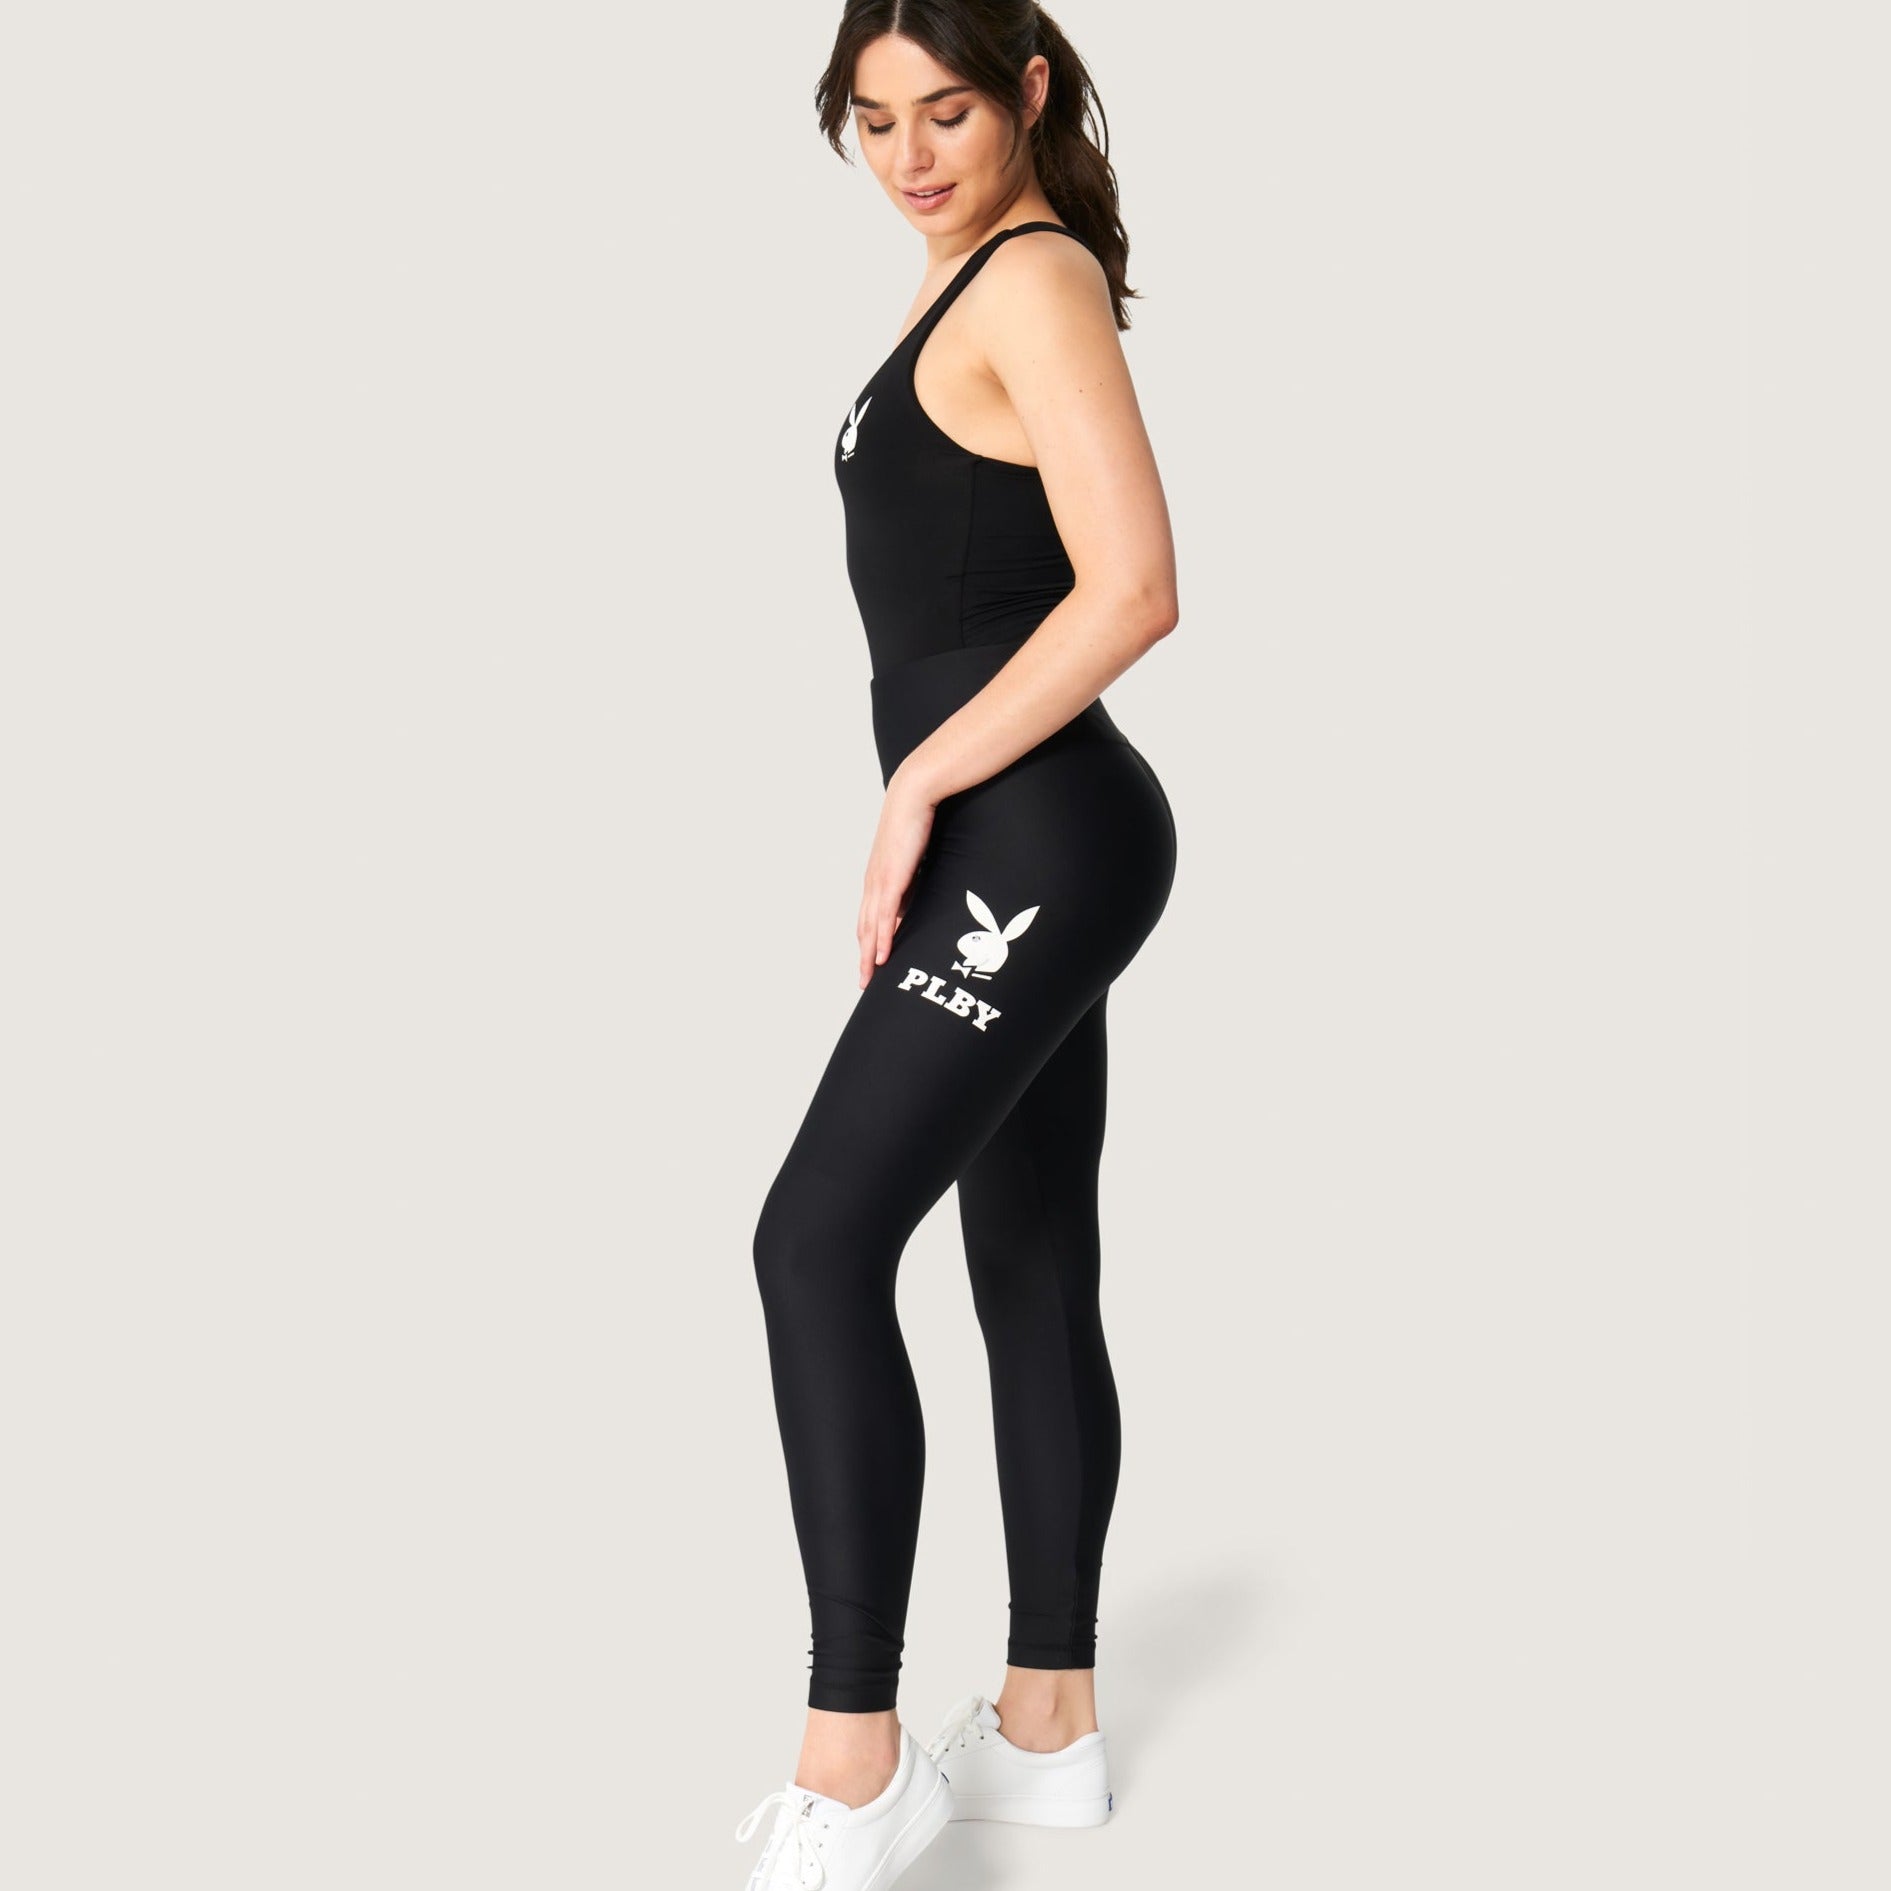 Missguided Black Athletic Pants for Women